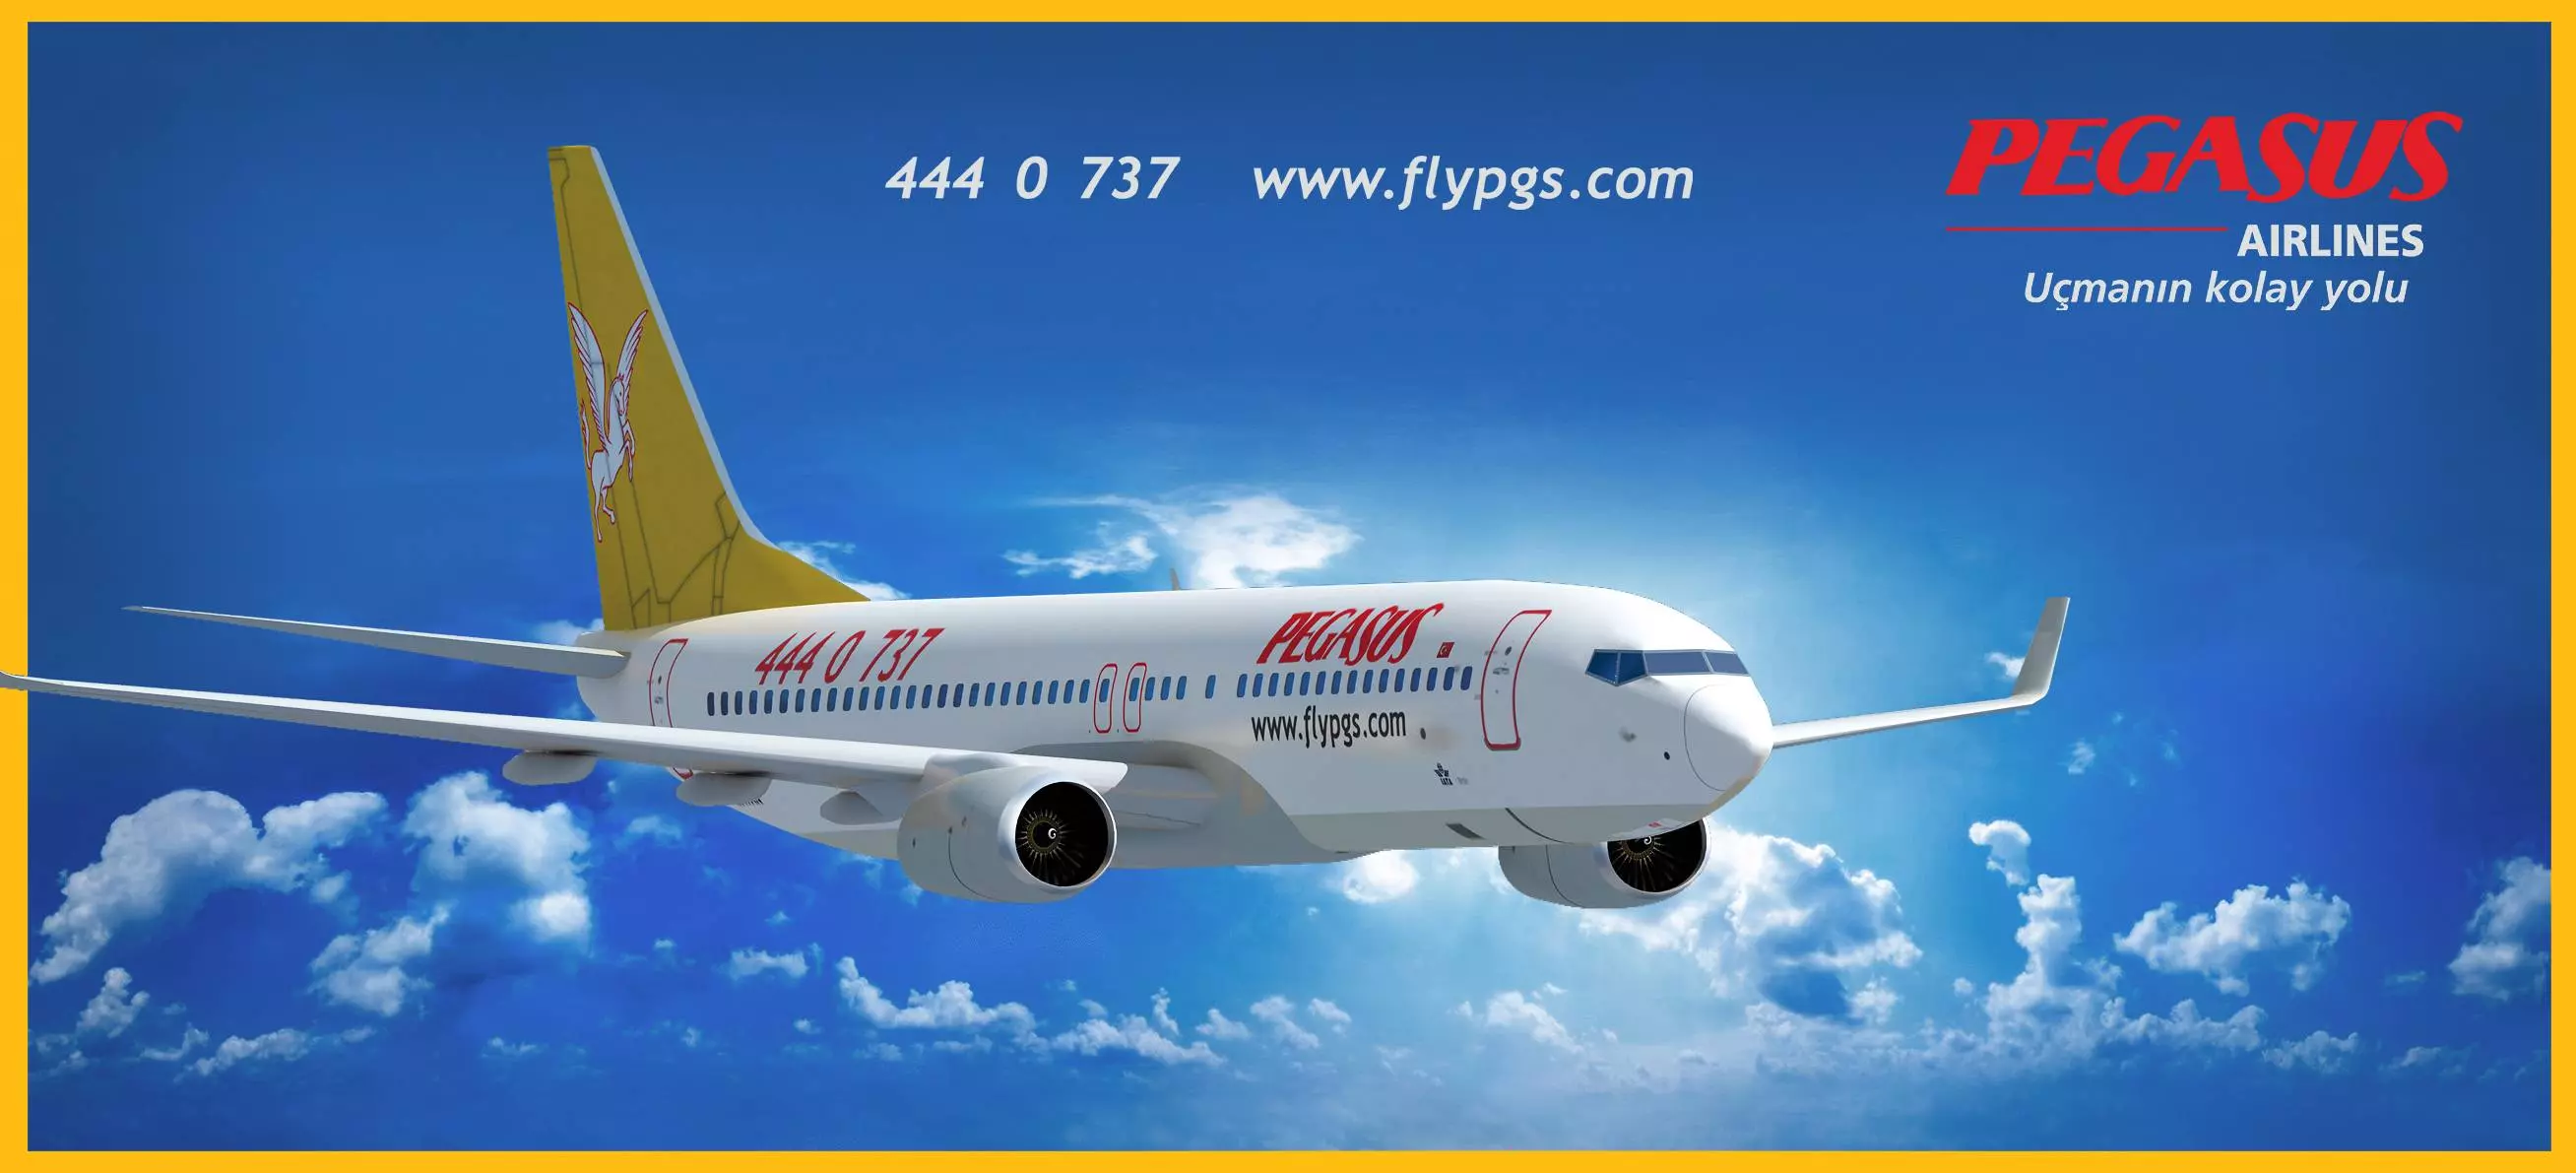 Cheap flights to egypt - pegasus airlines